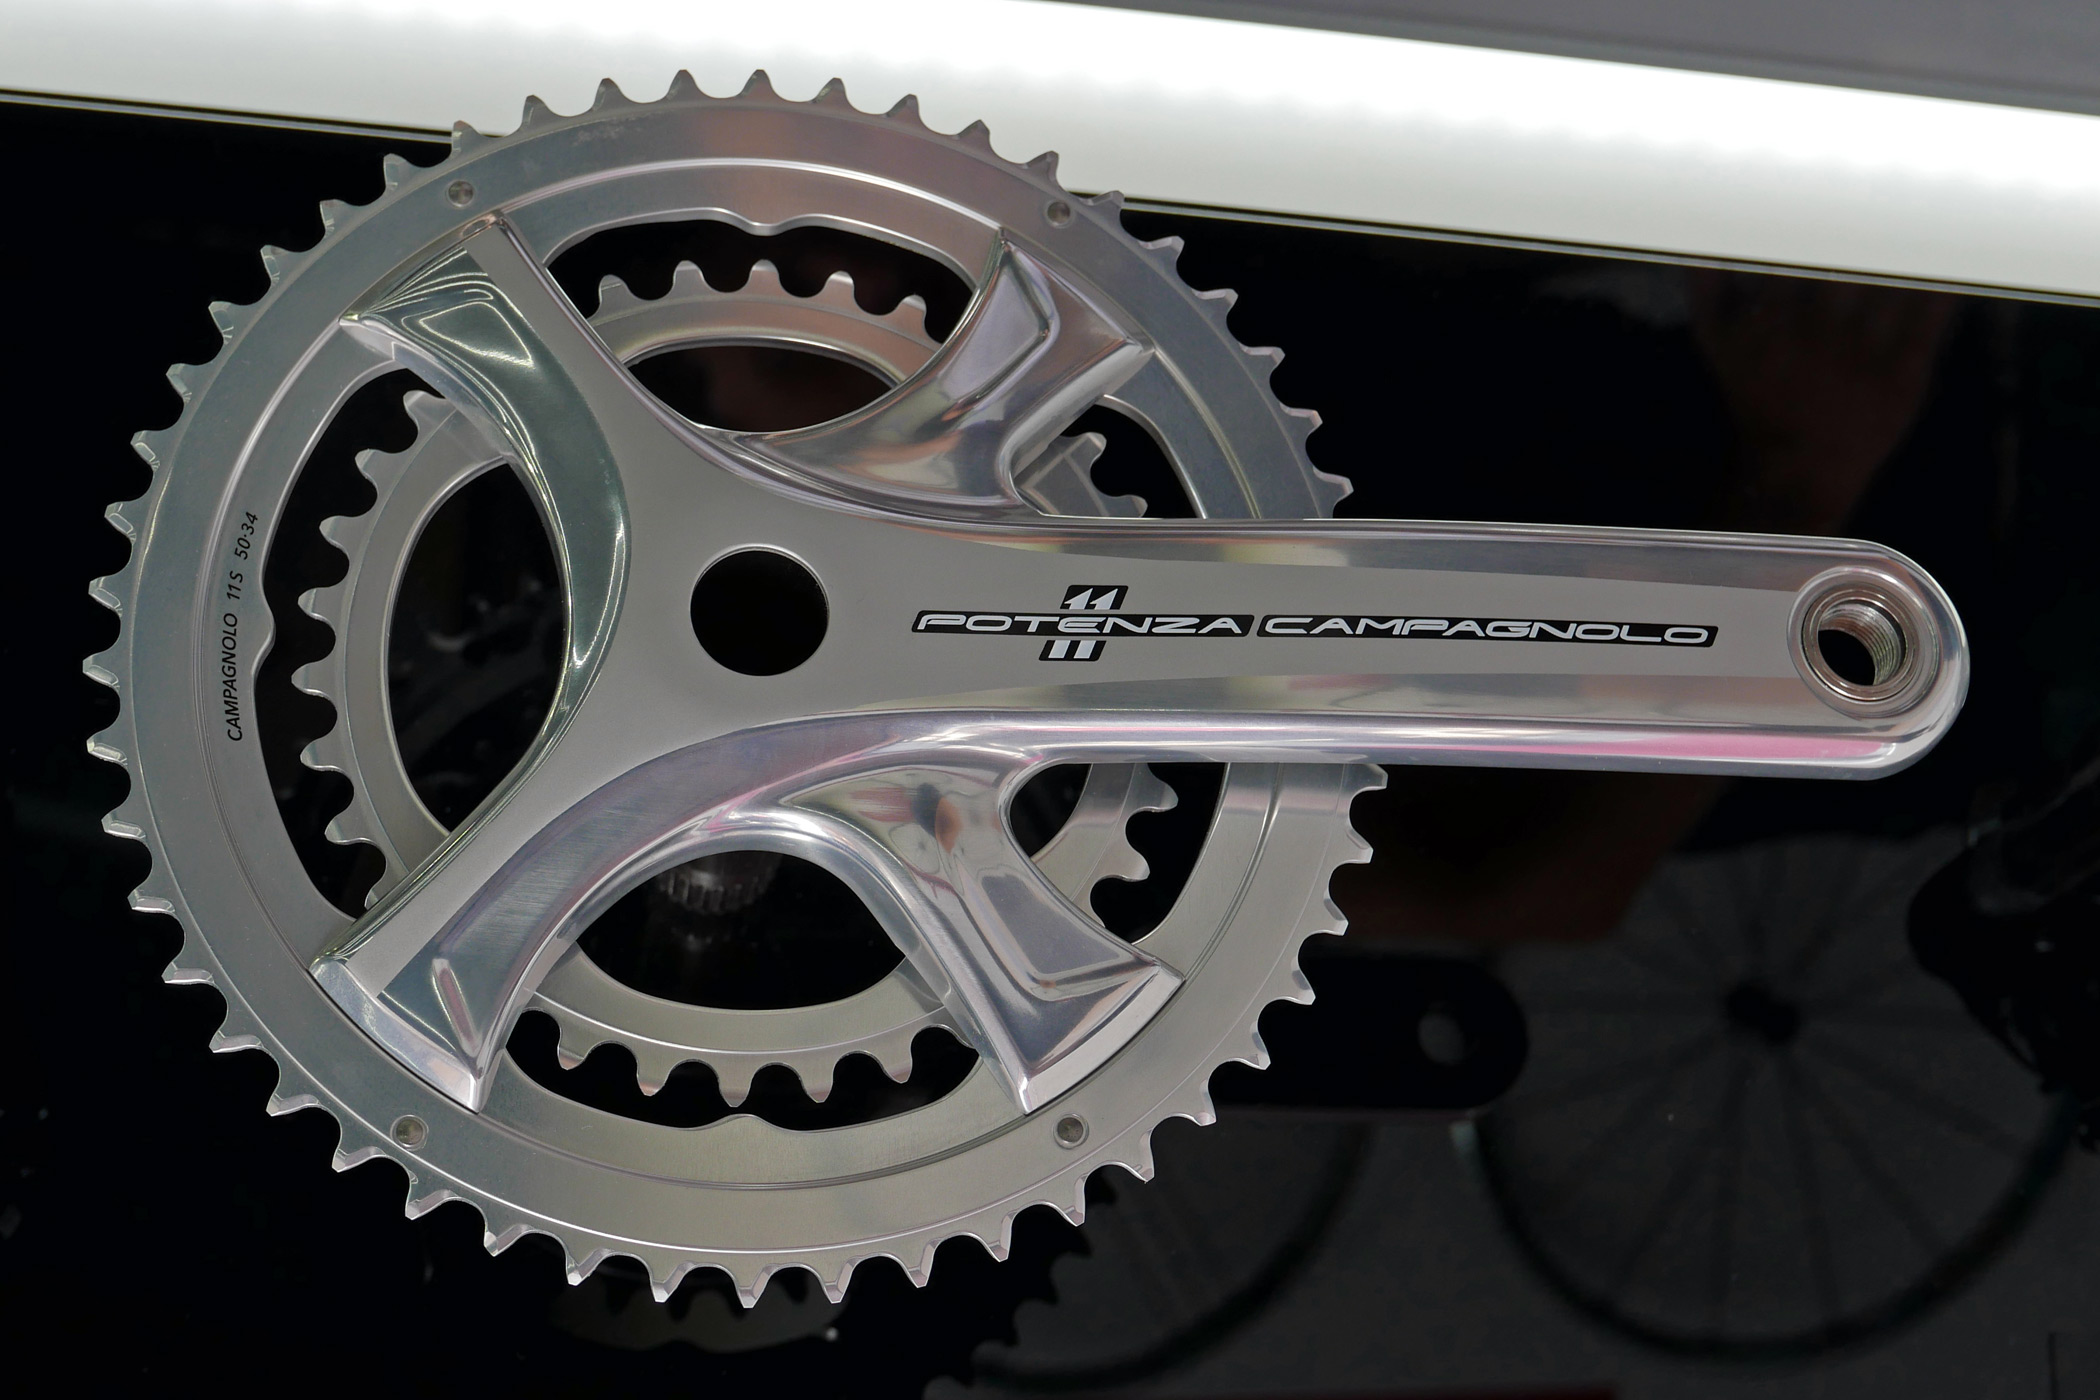 Classicists rejoice, Campagnolo Potenza 11 brings back polished silver